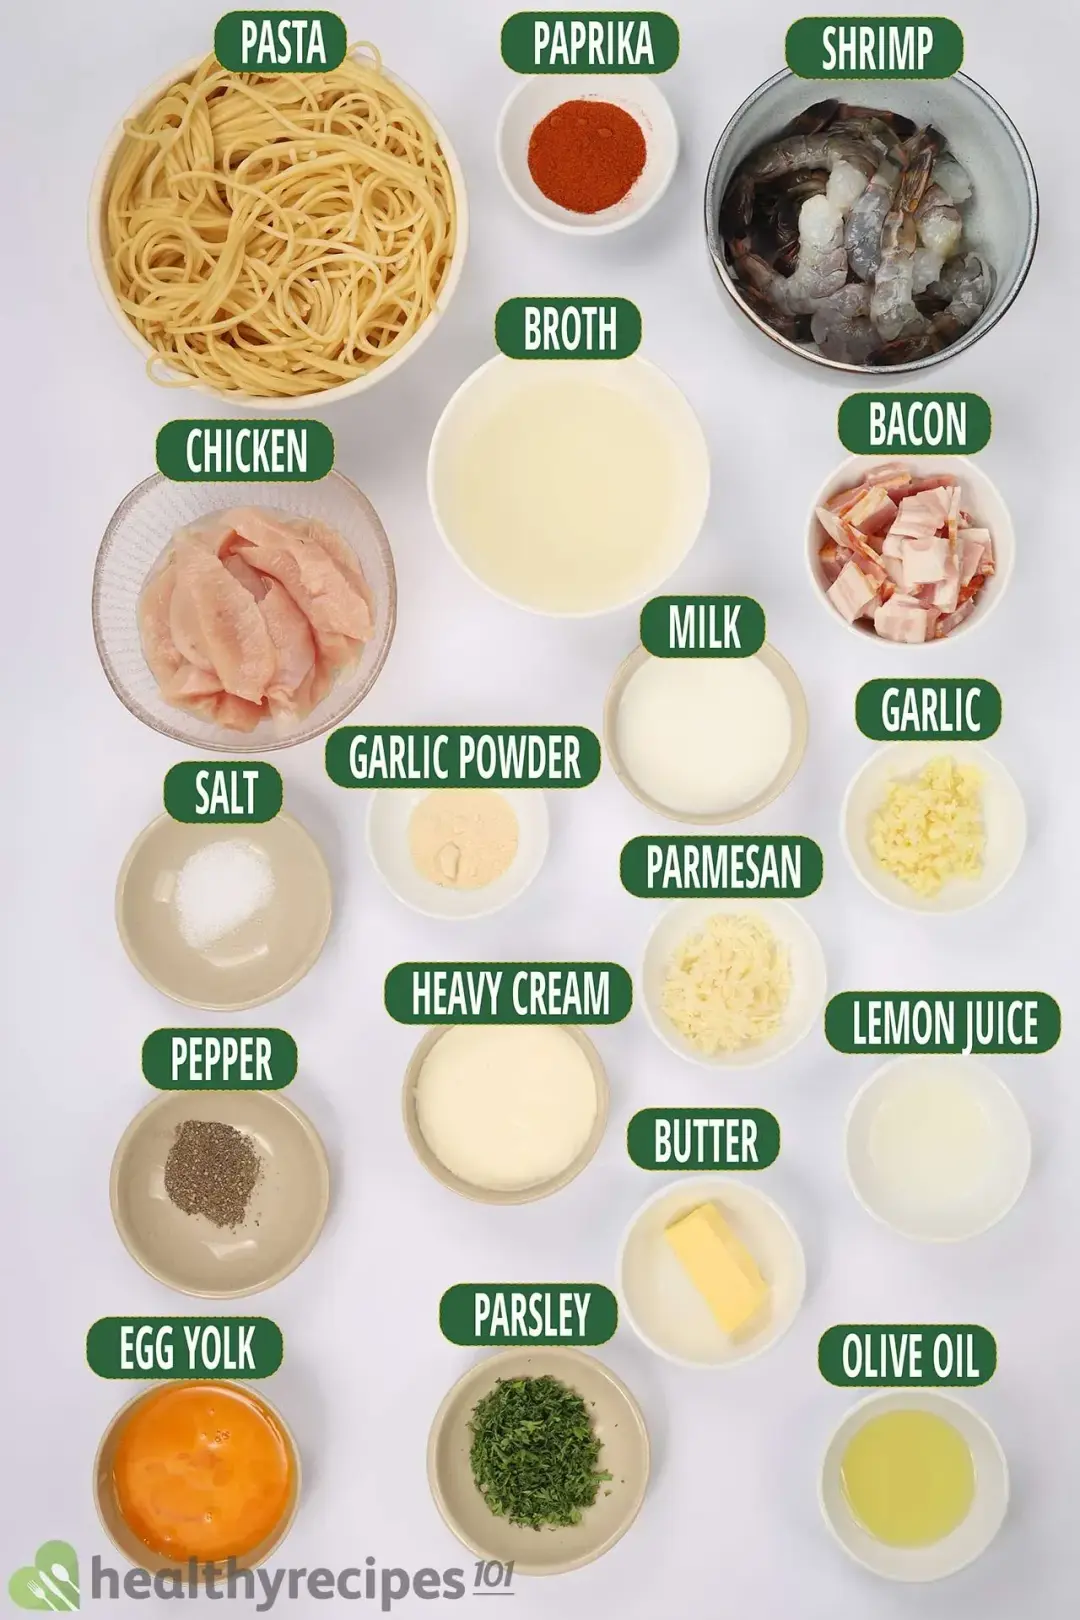 ngredients for Chicken and Shrimp Carbonara